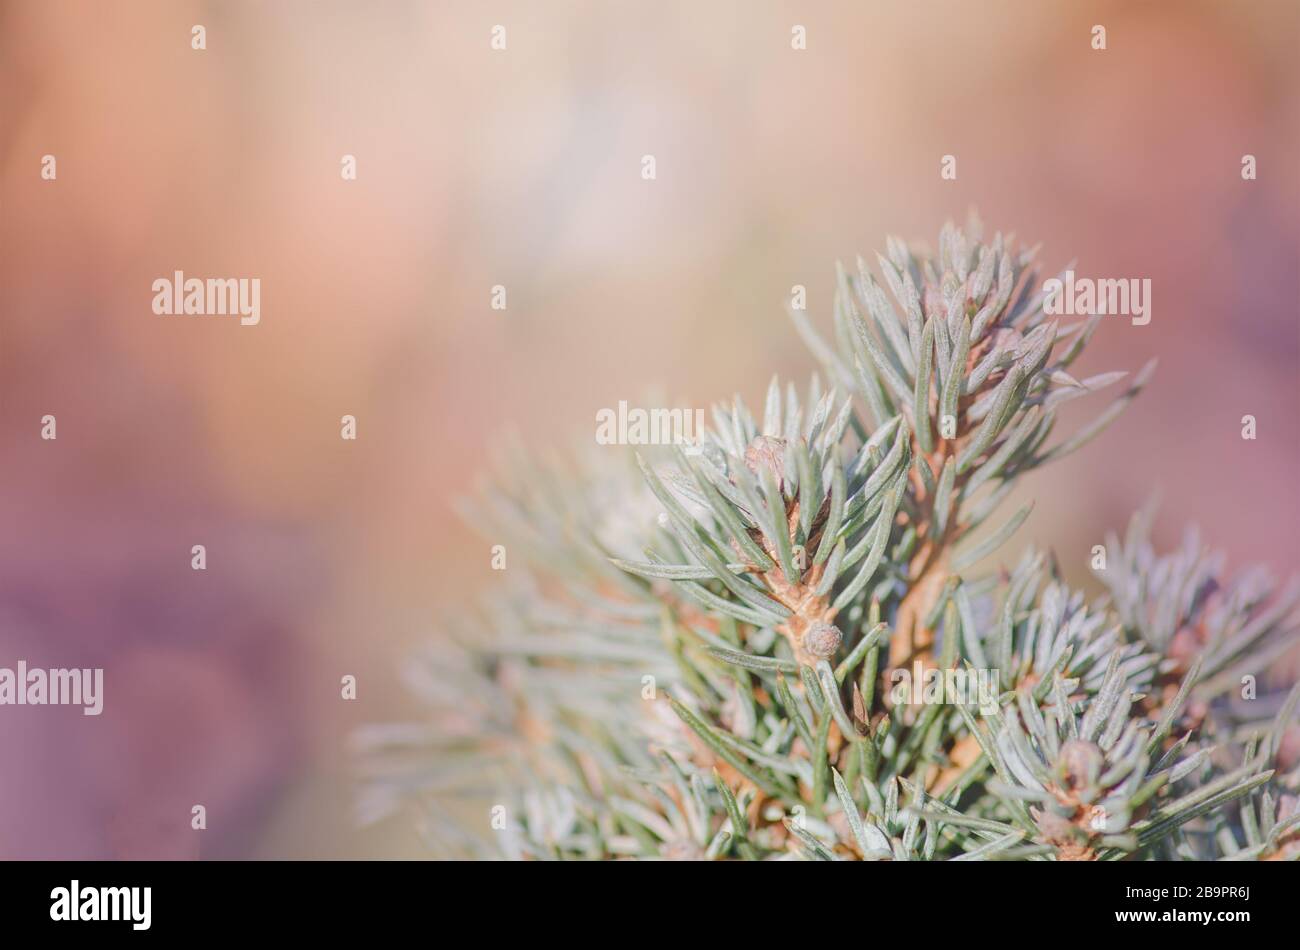 Winter garden with conifer covered with snow Stock Photo